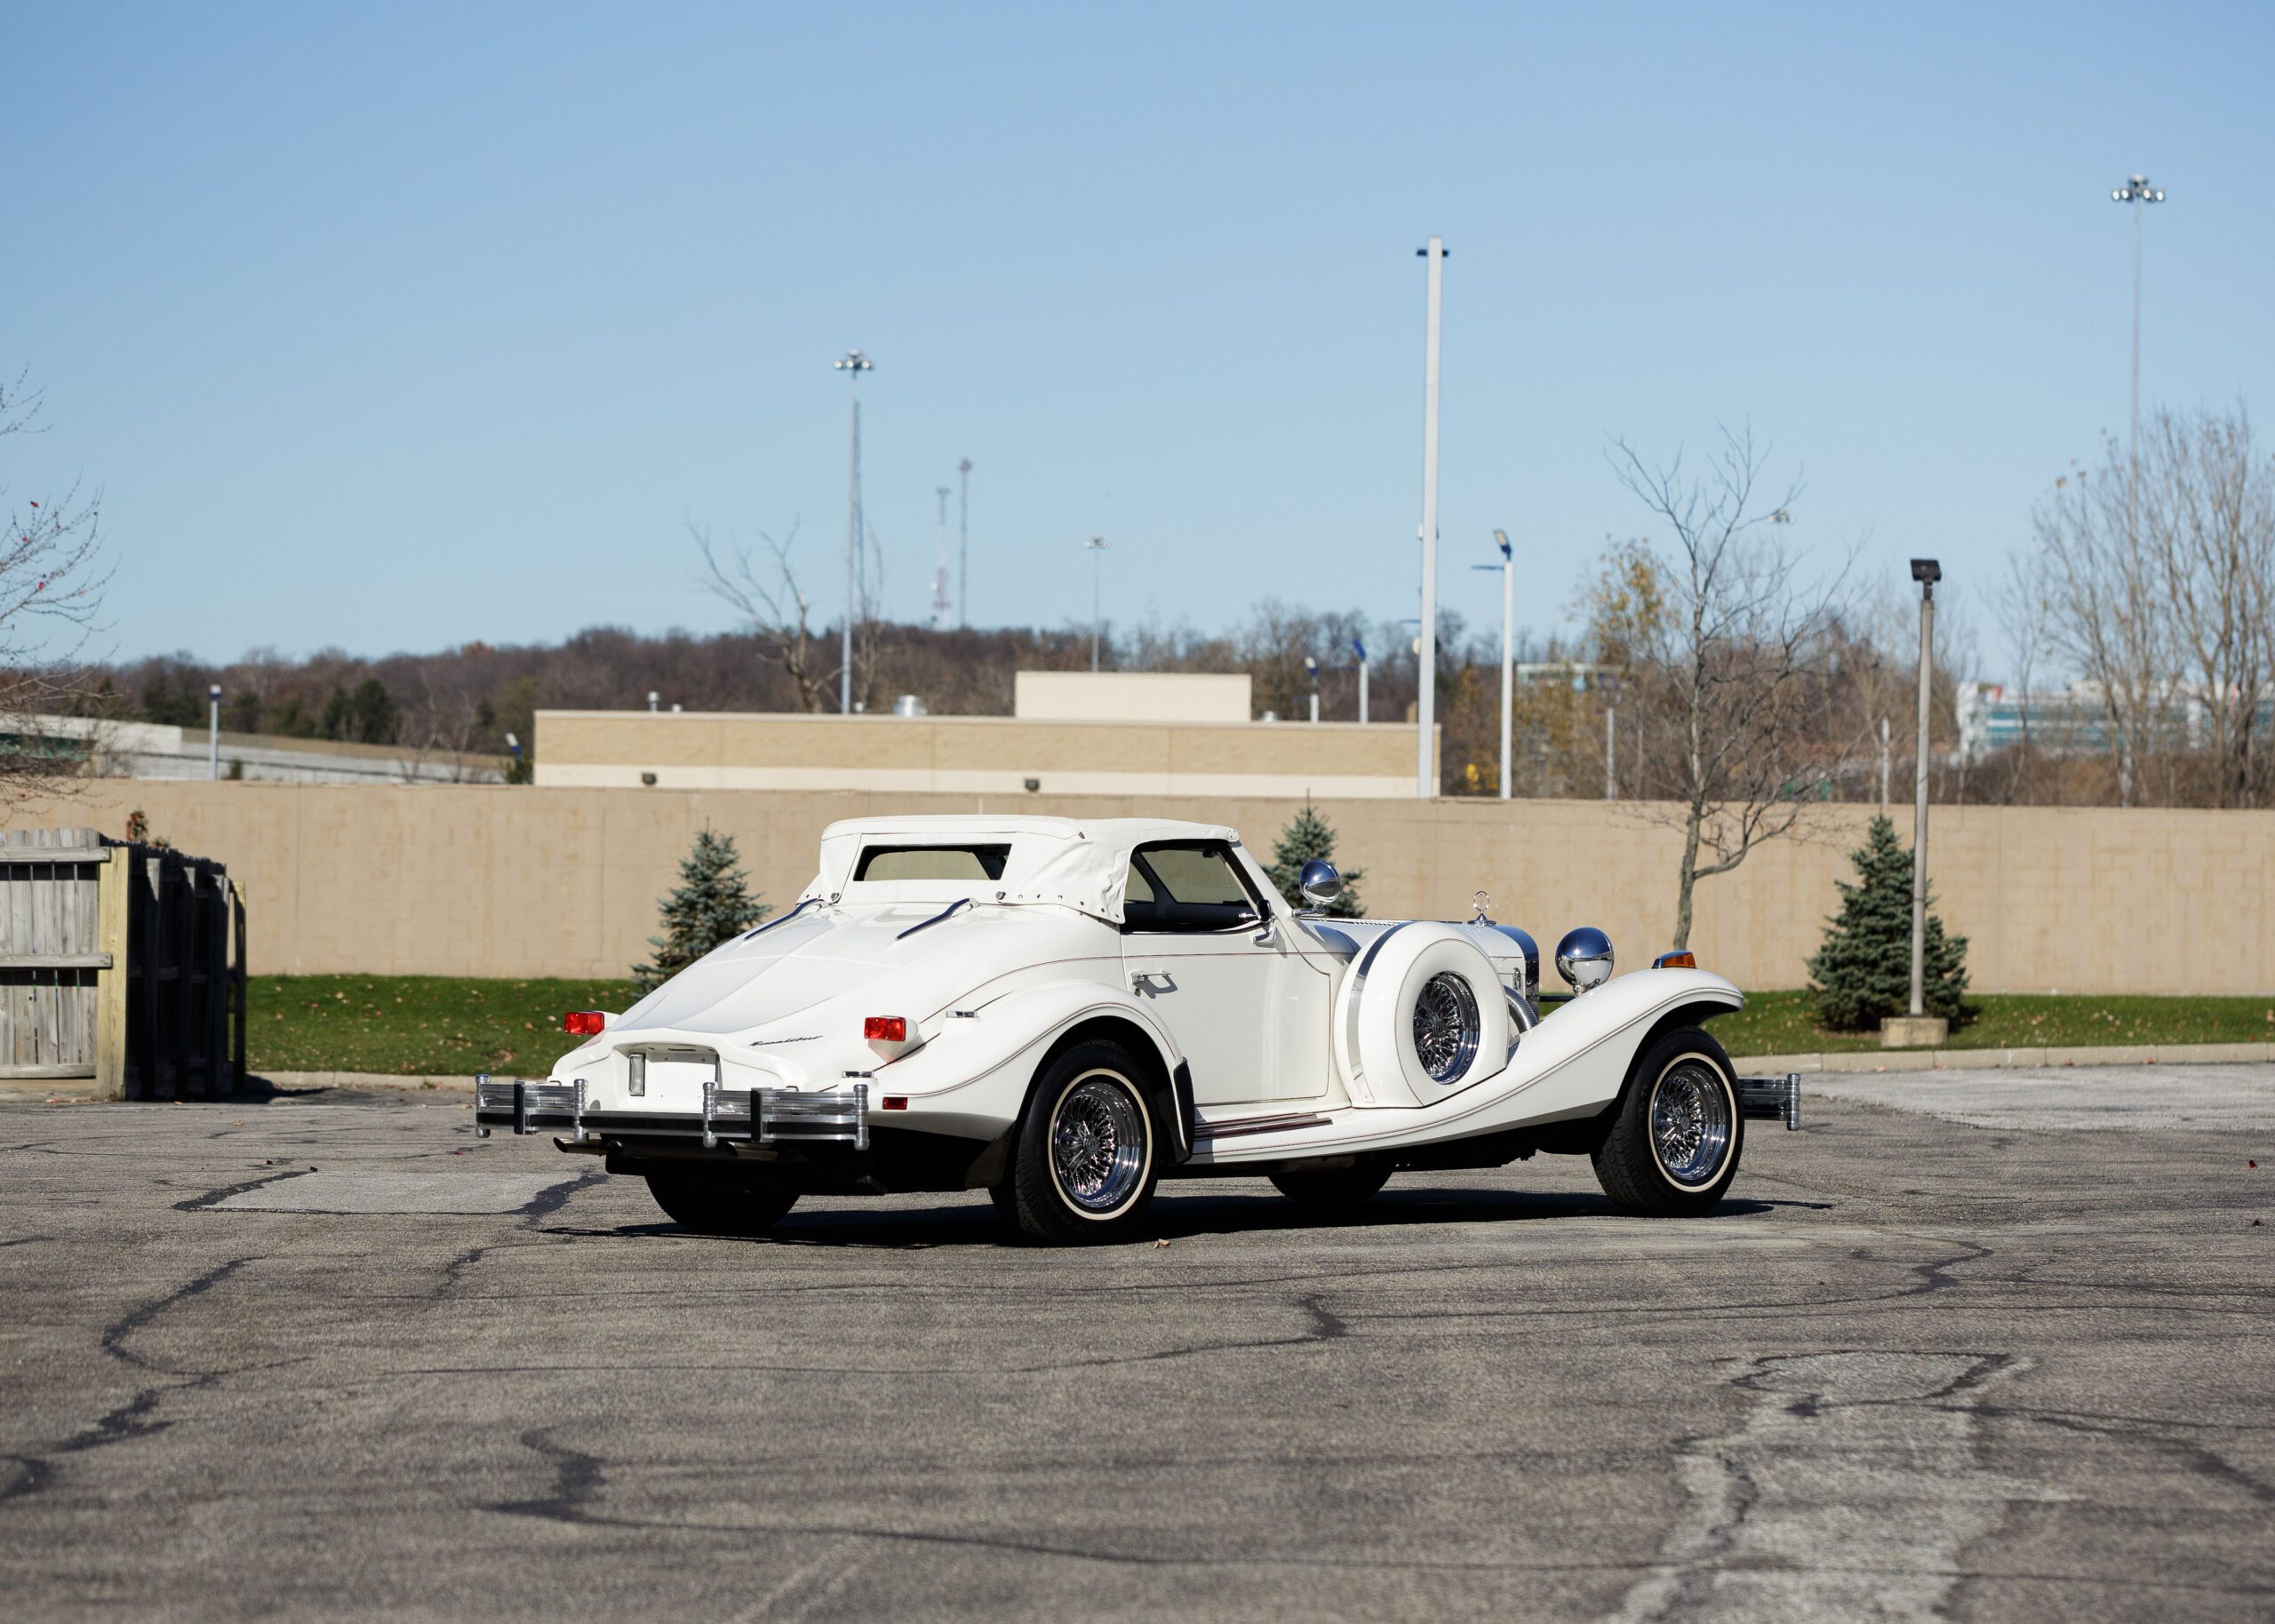 1983 Excalibur Series IV Roadster Drew Shipley ©2022 Courtesy of RM Sotheby's